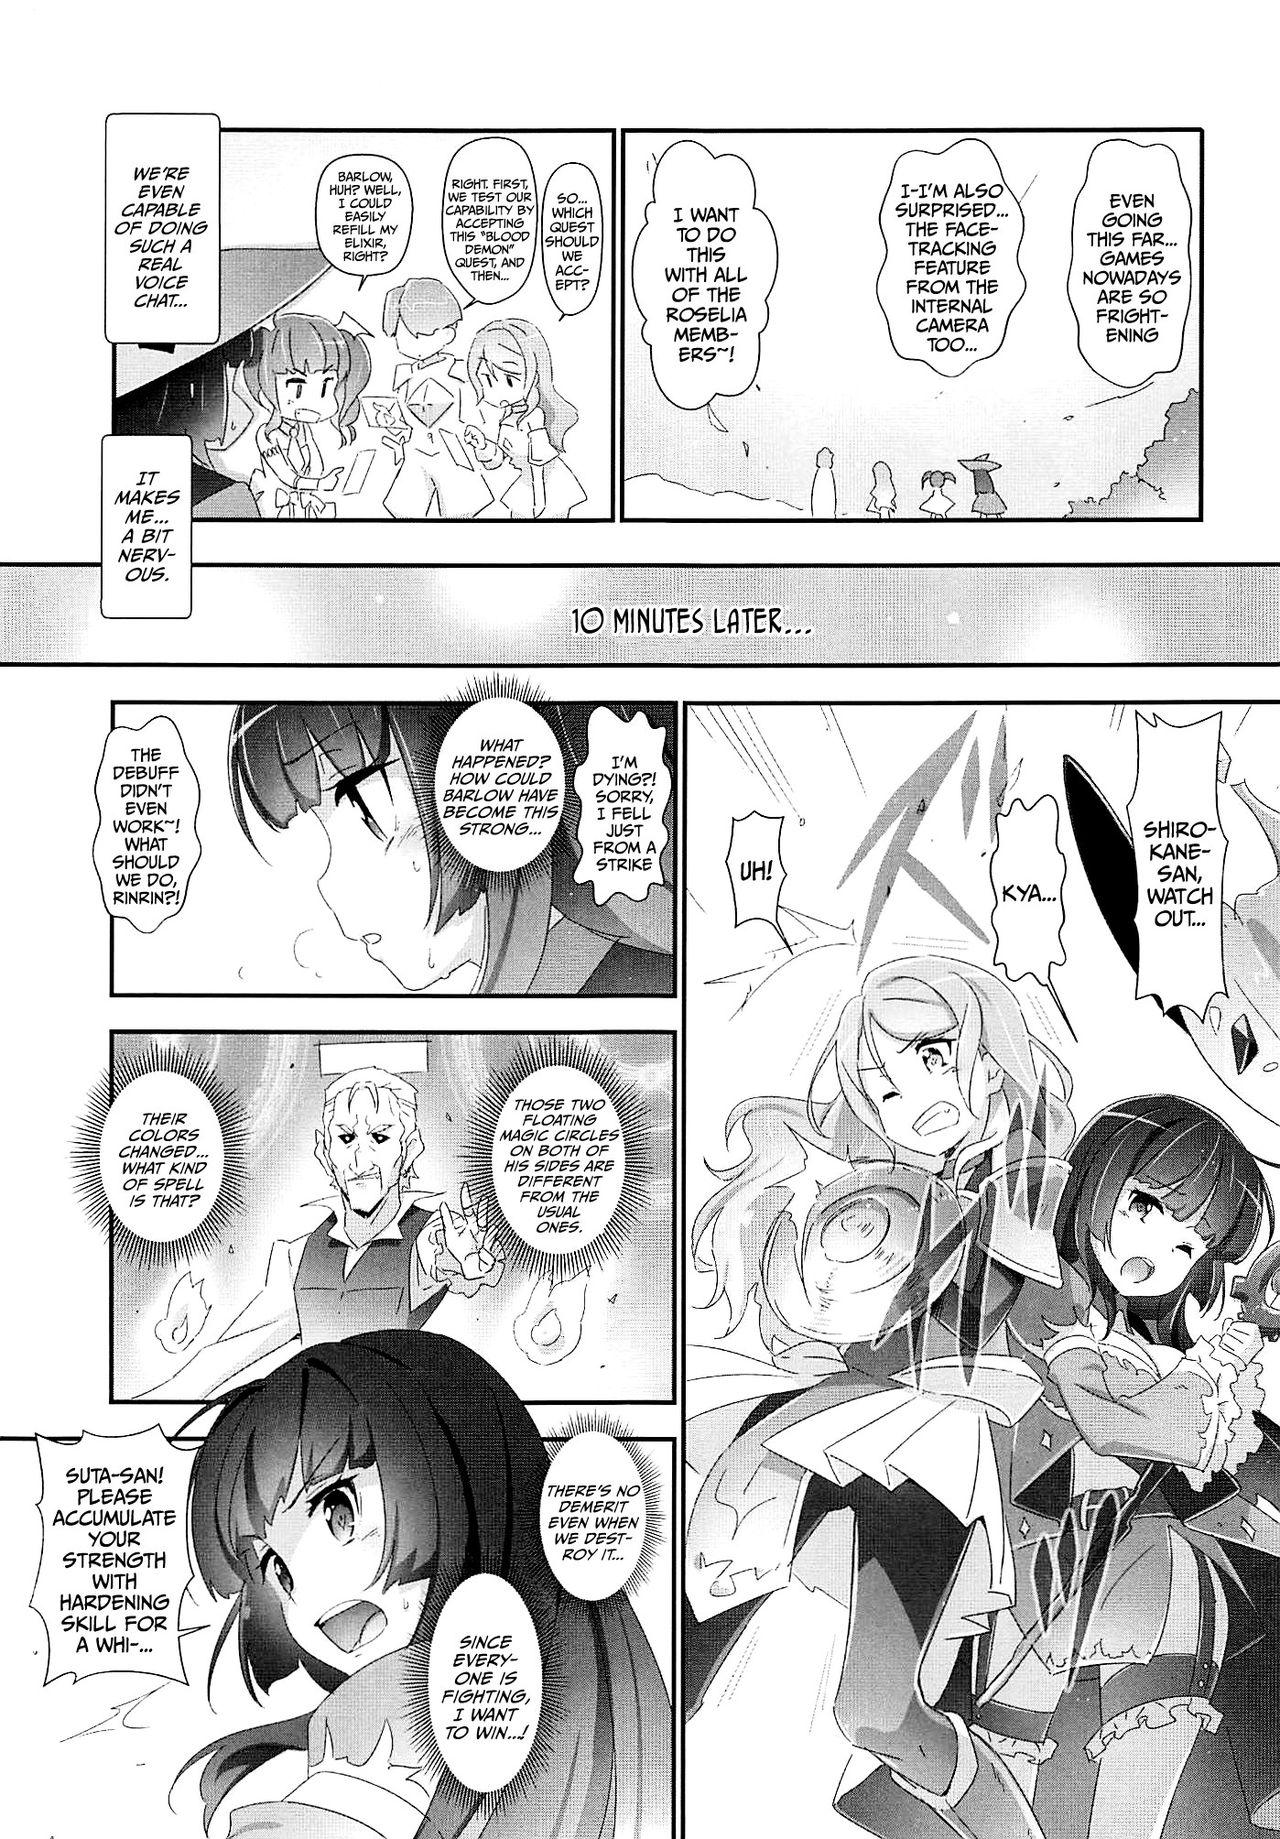 Couples EroYoro? 9 - Bang dream Foursome - Page 6